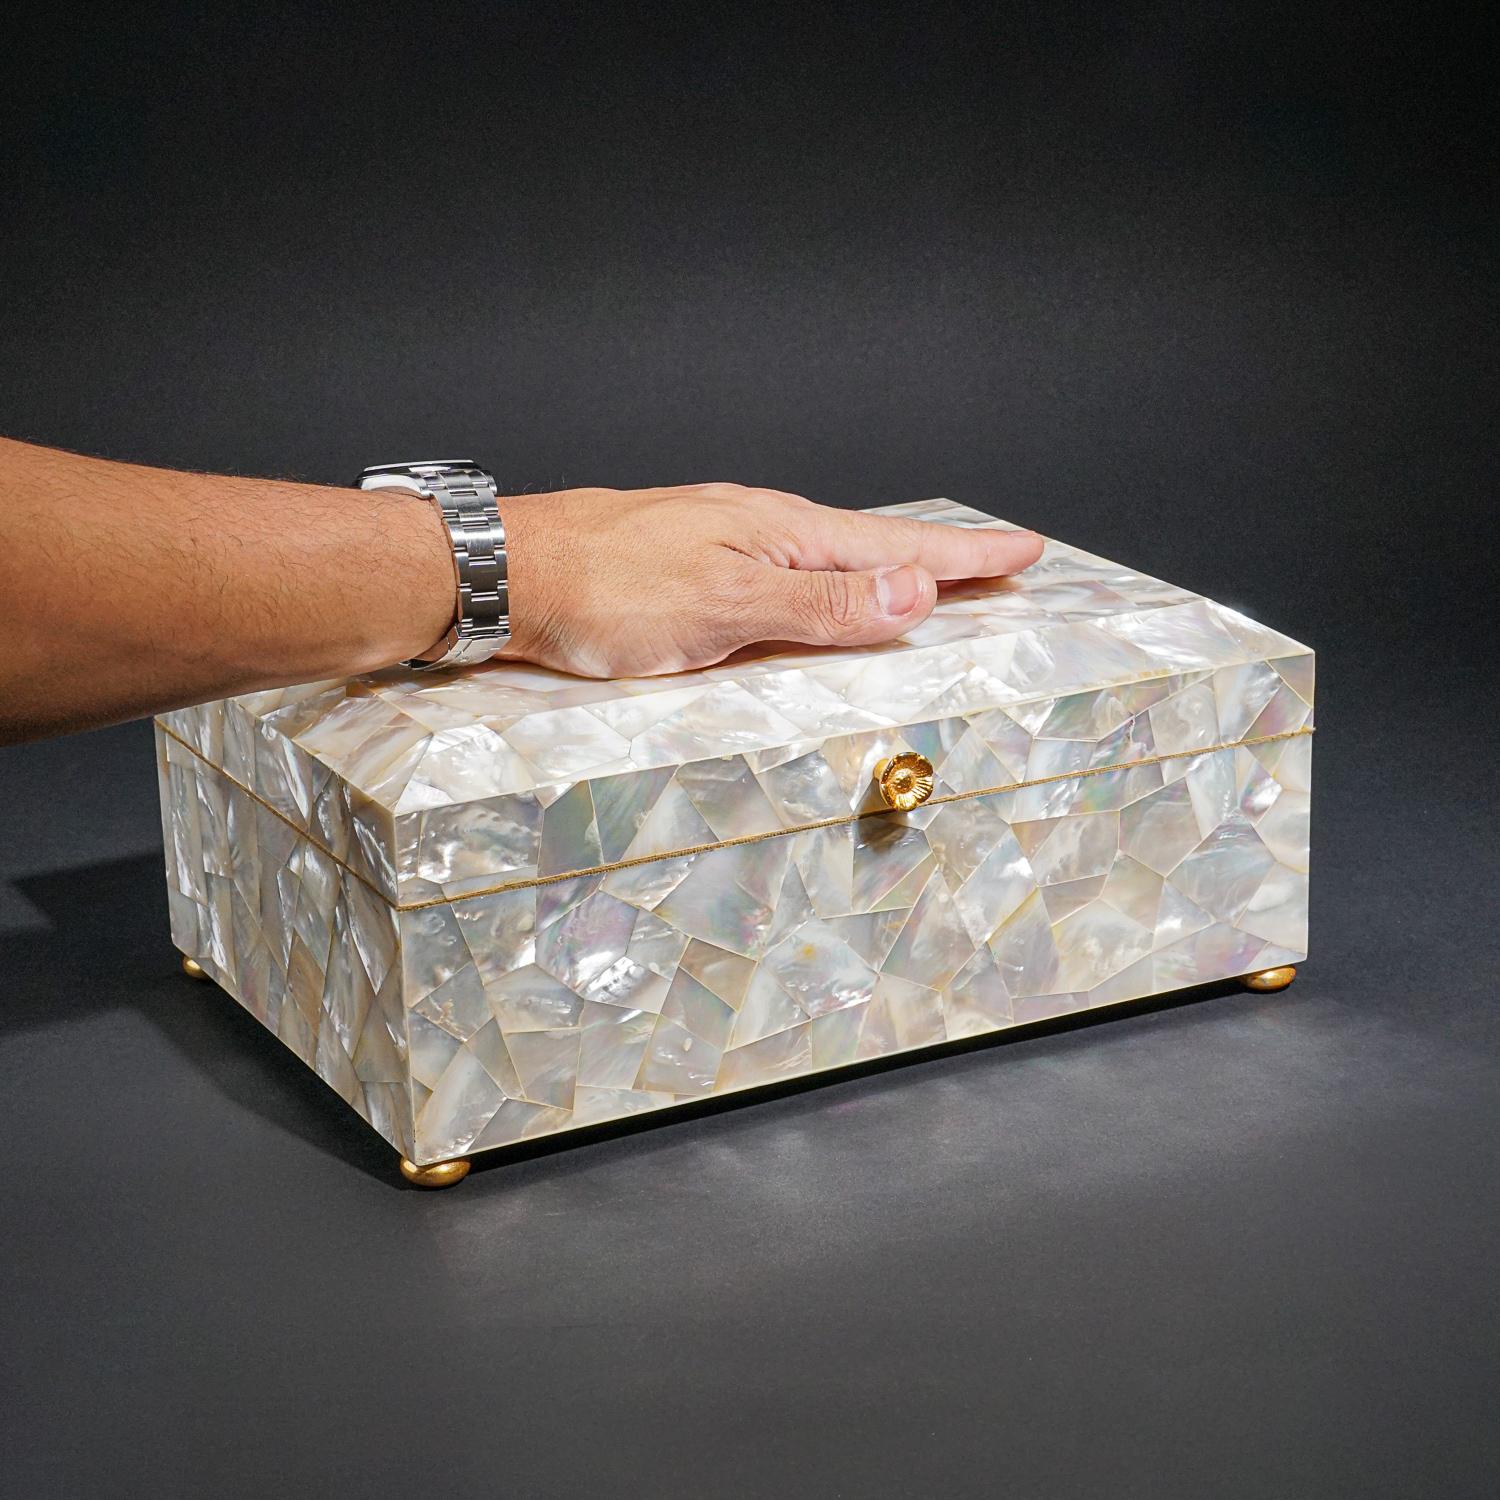 Genuine Large Mother of Pearl Decorative Jewelry Box (12